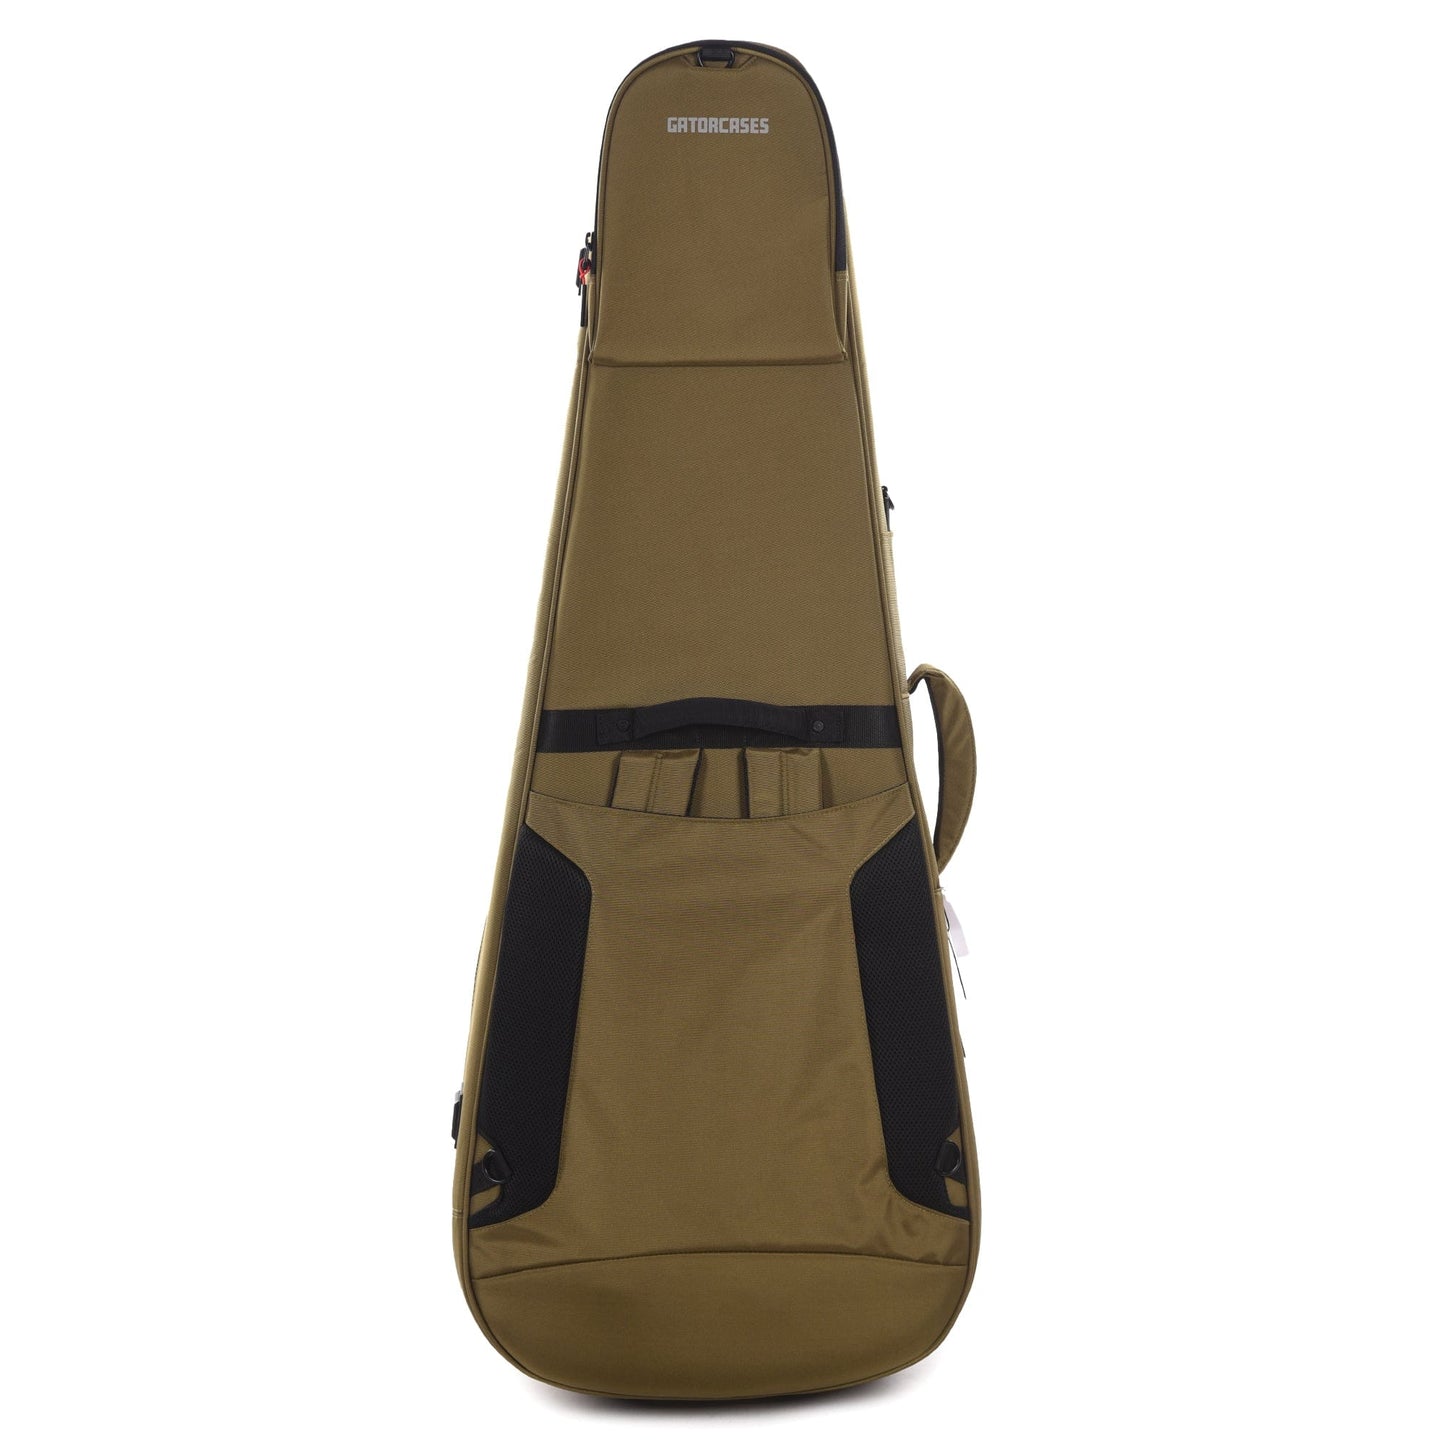 Gator ICON Series Gig Bag for Dreadnaught Acoustic Guitars Green Accessories / Cases and Gig Bags / Guitar Cases